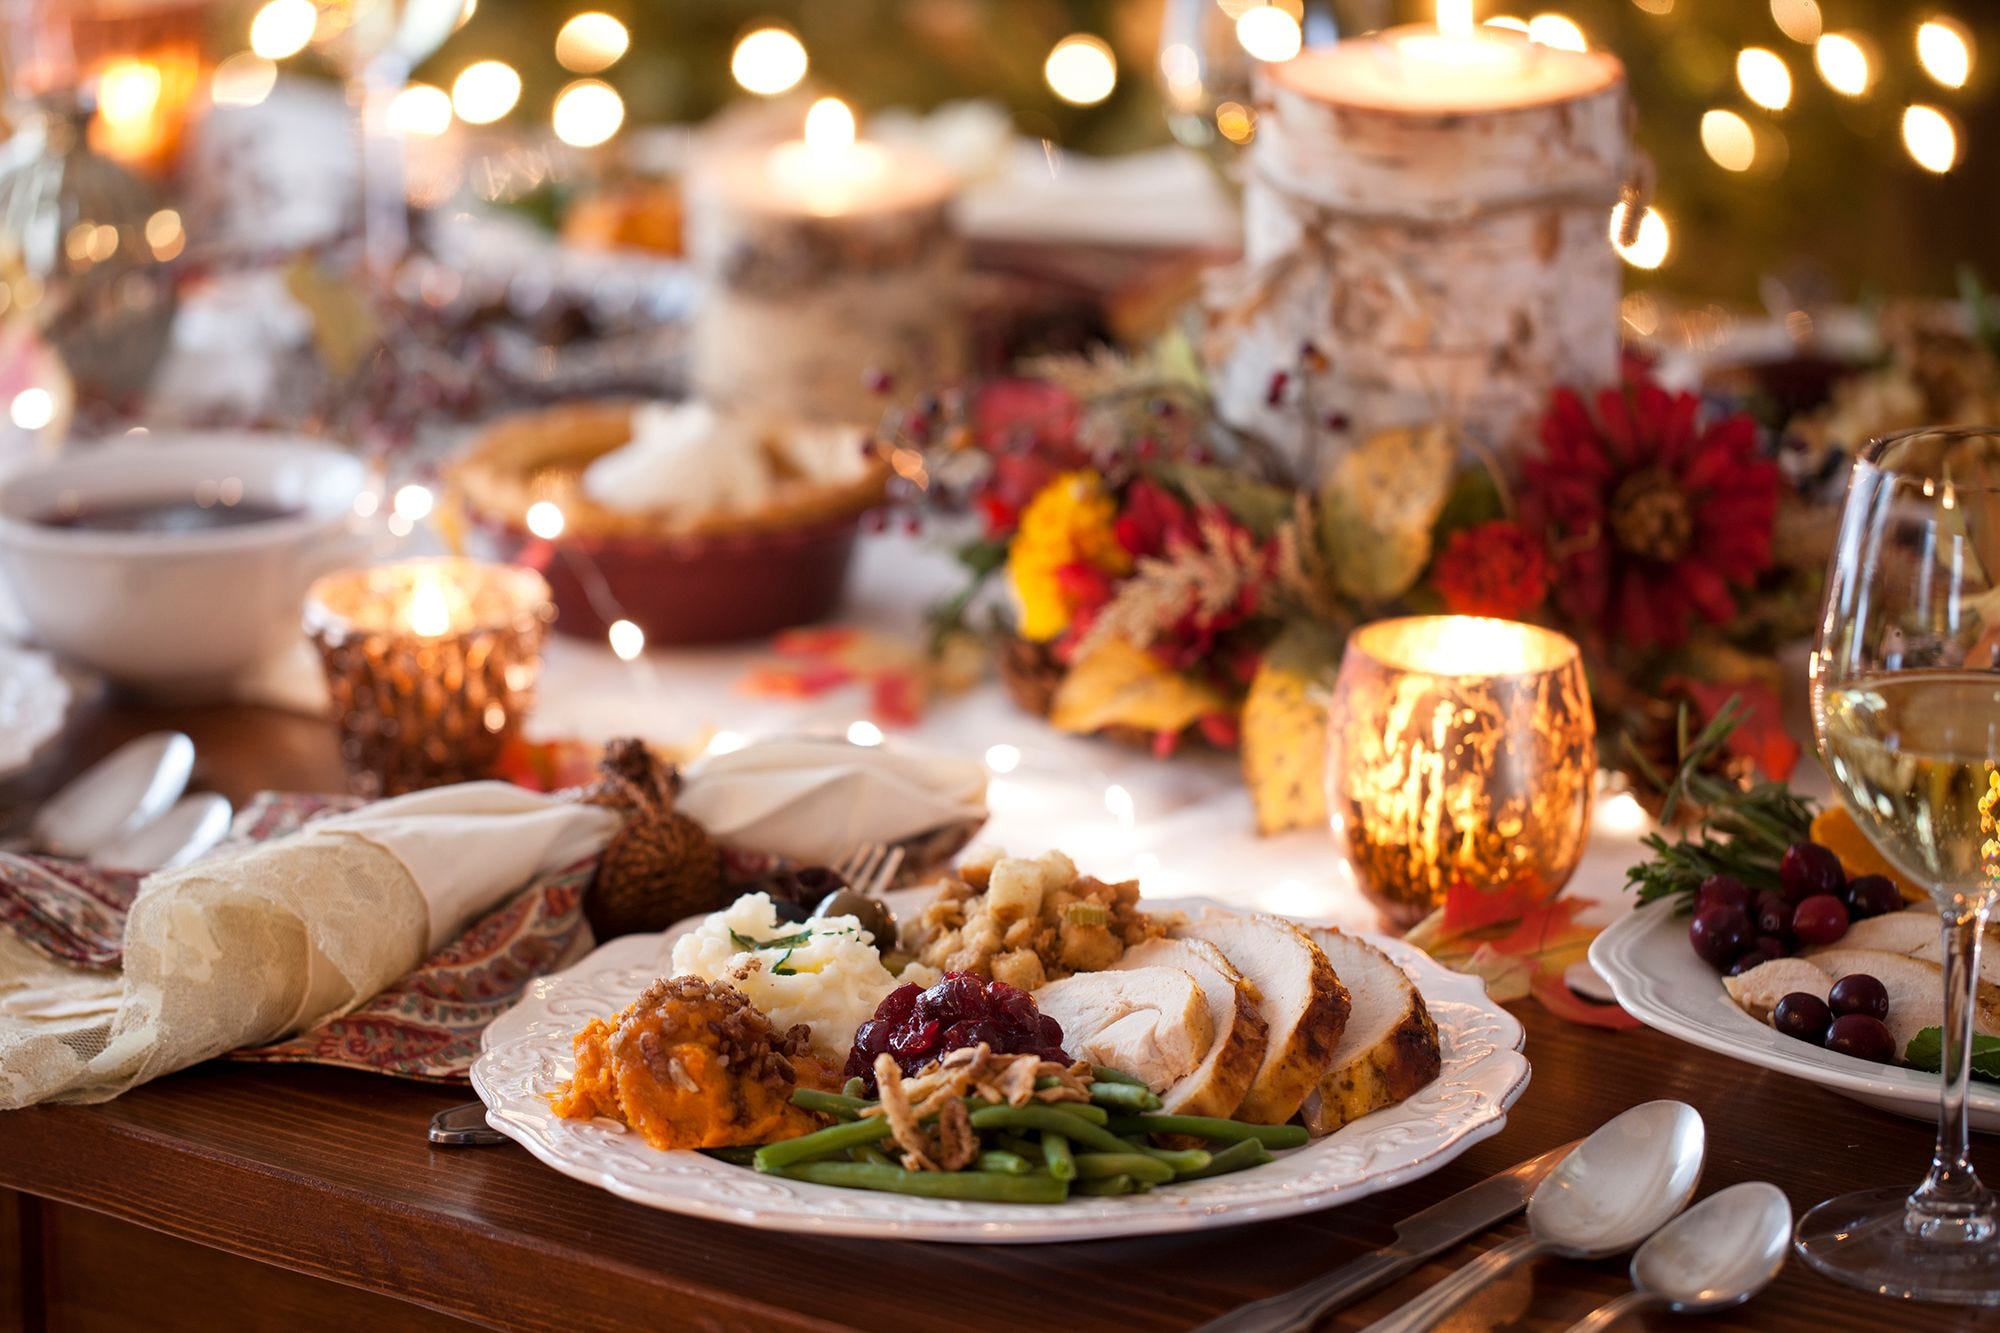 California Thanksgiving mandate: No more than three households can attend, dinner outside and six feet apart